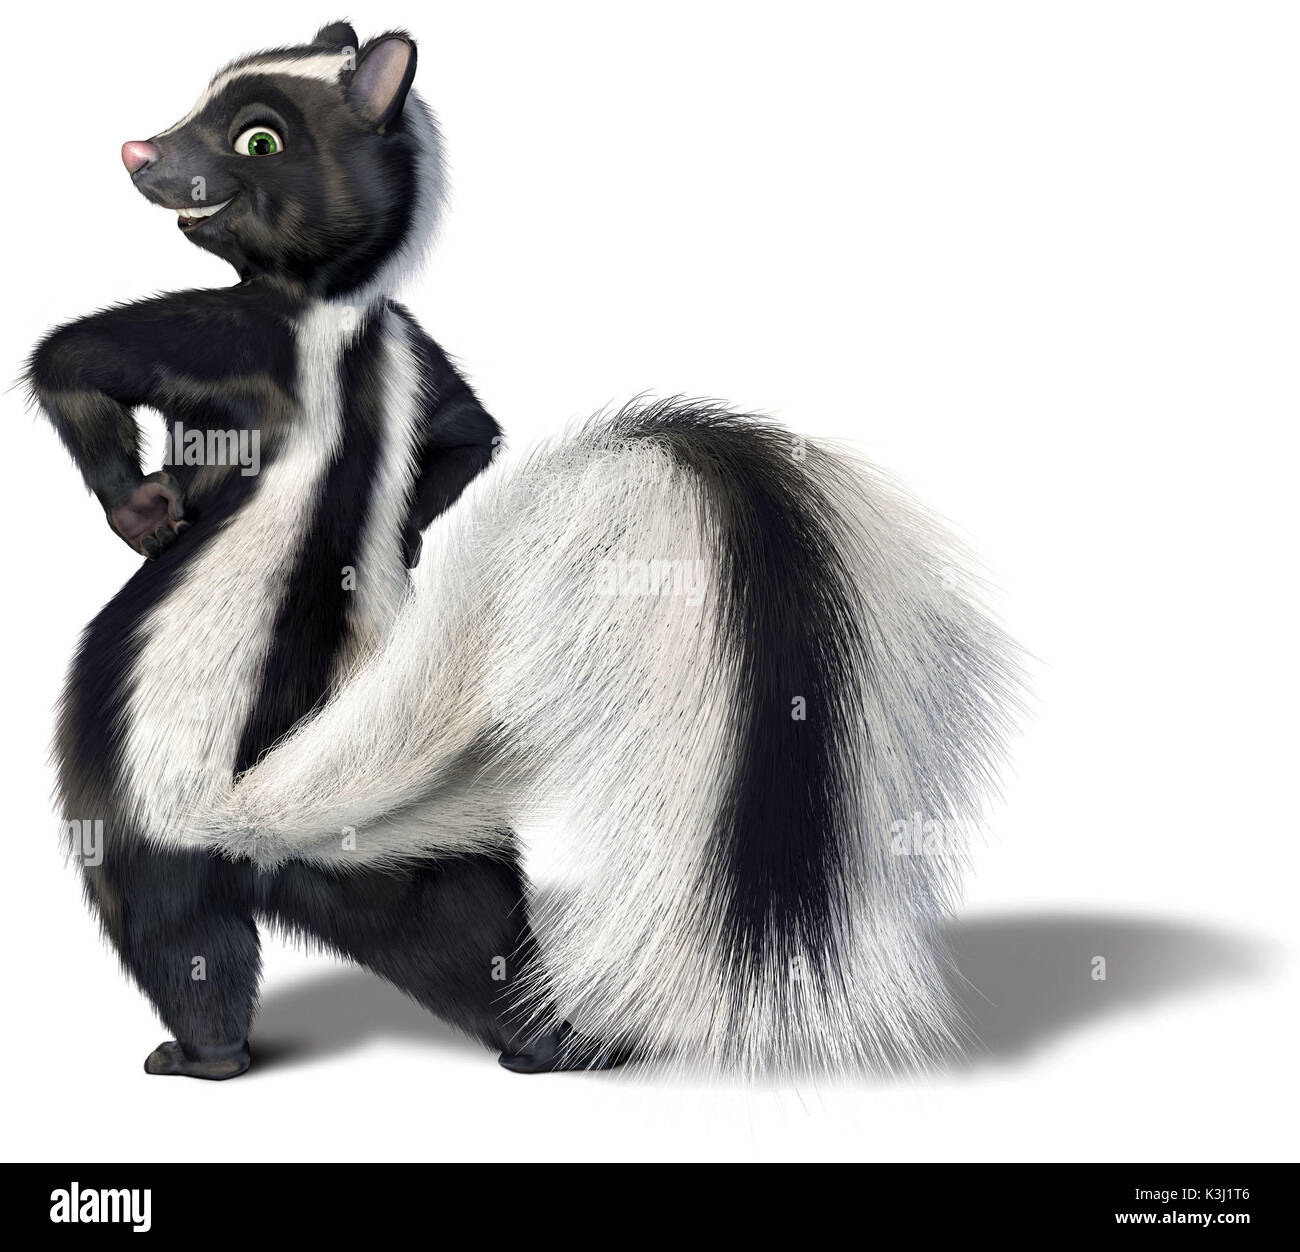 Pictured: Stella the Skunk from DreamWorks Animation's computer-animated comedy OVER THE HEDGE. OVER THE HEDGE [US 2006]  Stella the Skunk     Date: 2006 Stock Photo